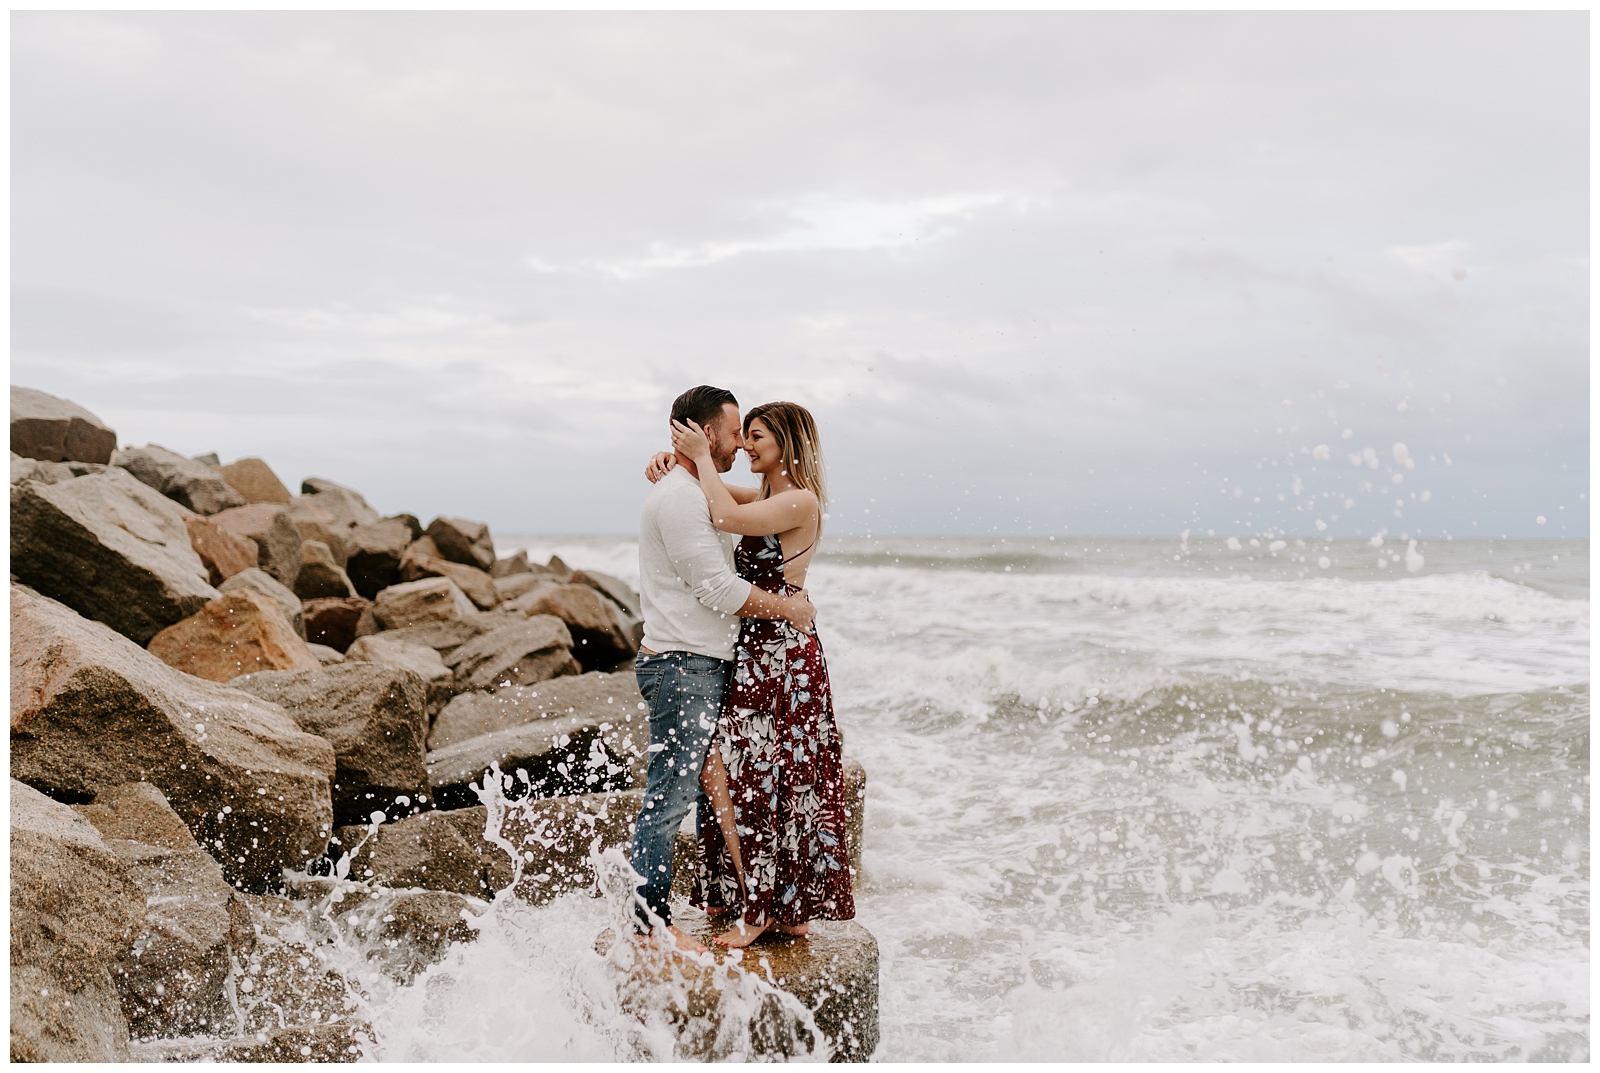 A fun and adventurous beach engagement session with crashing waves